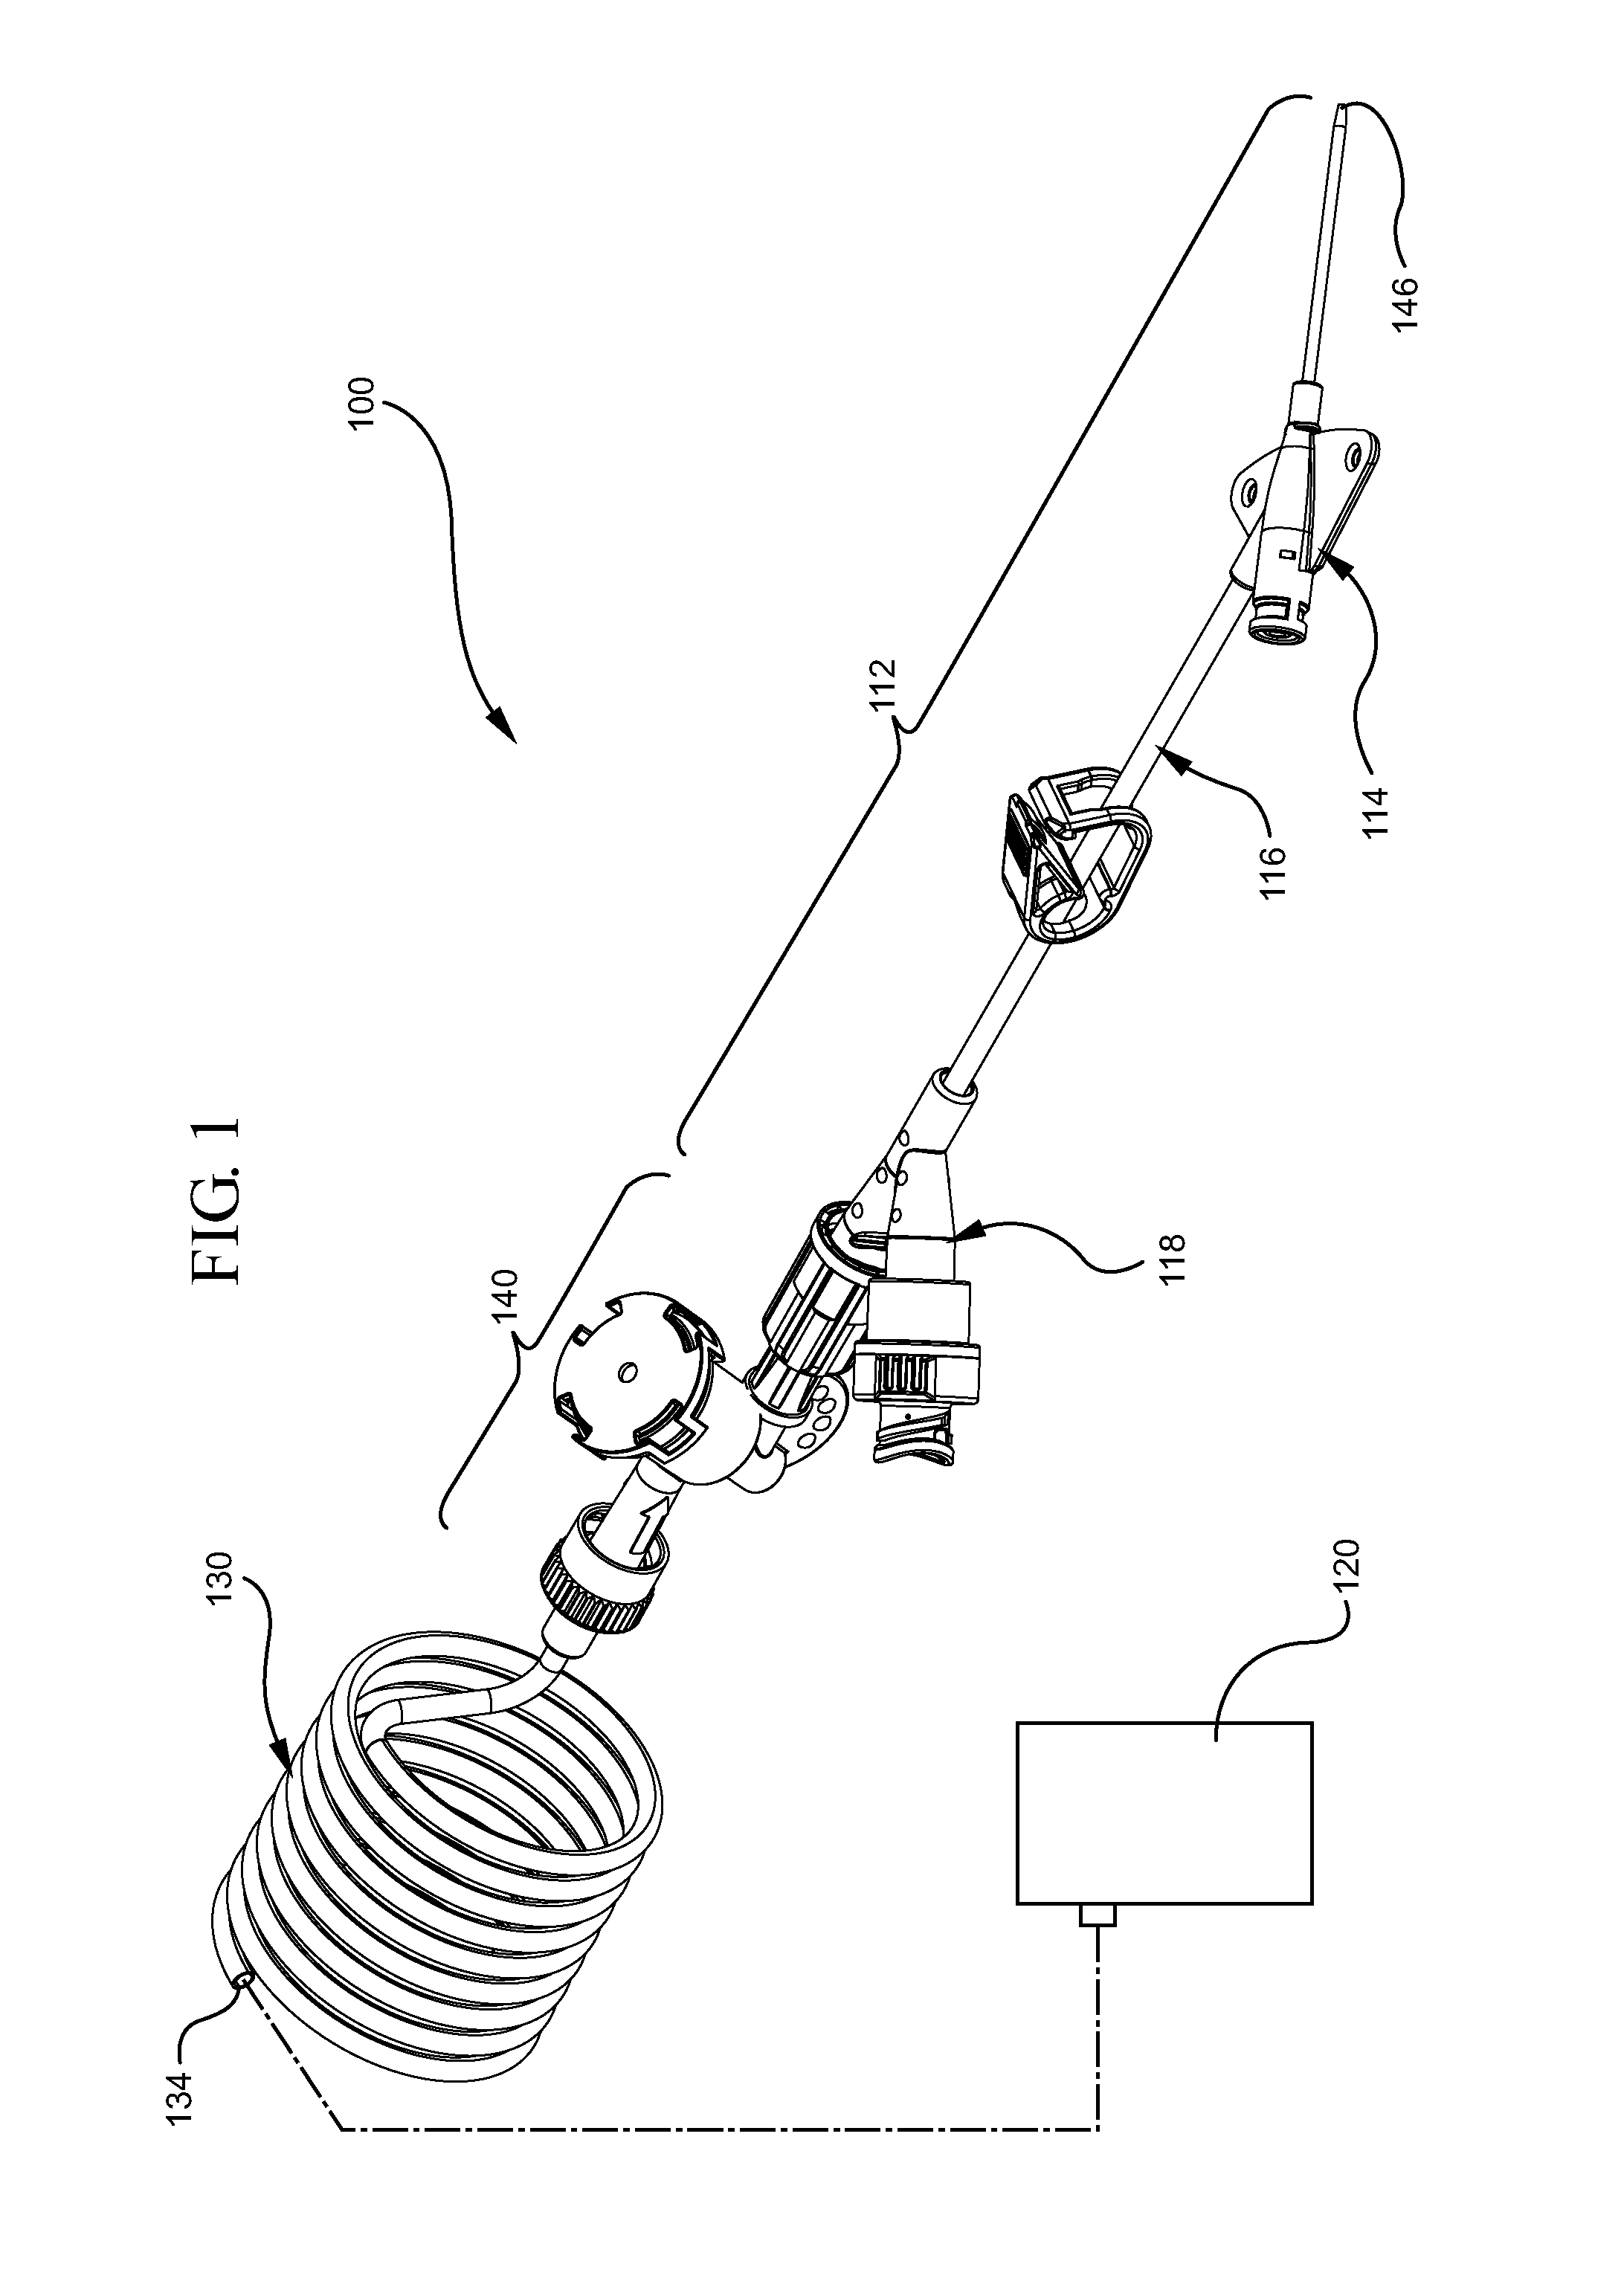 Catheter hole having an inclined trailing edge